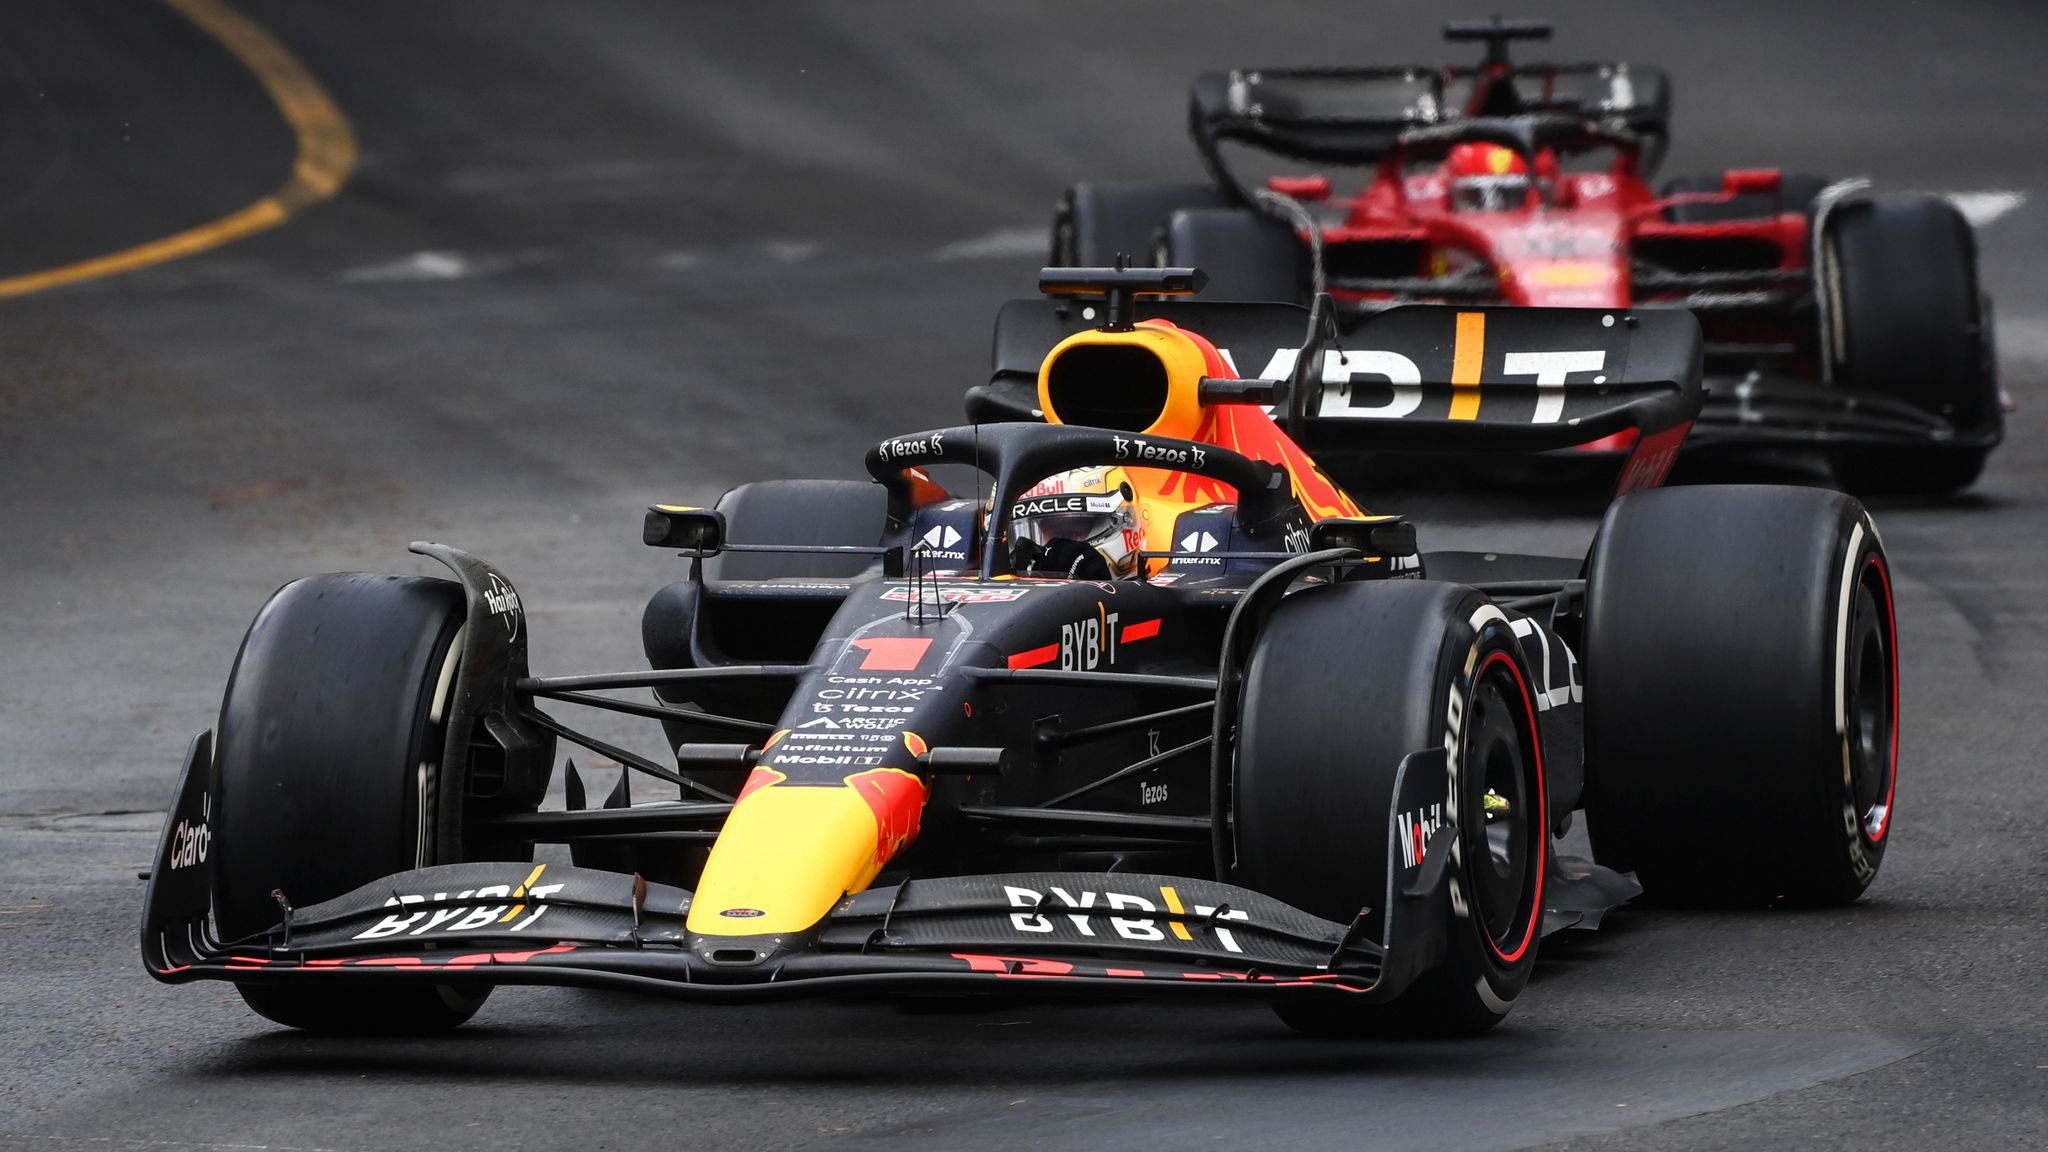 Monaco Grand Prix facing disruption threat with power cut protest plans :  PlanetF1